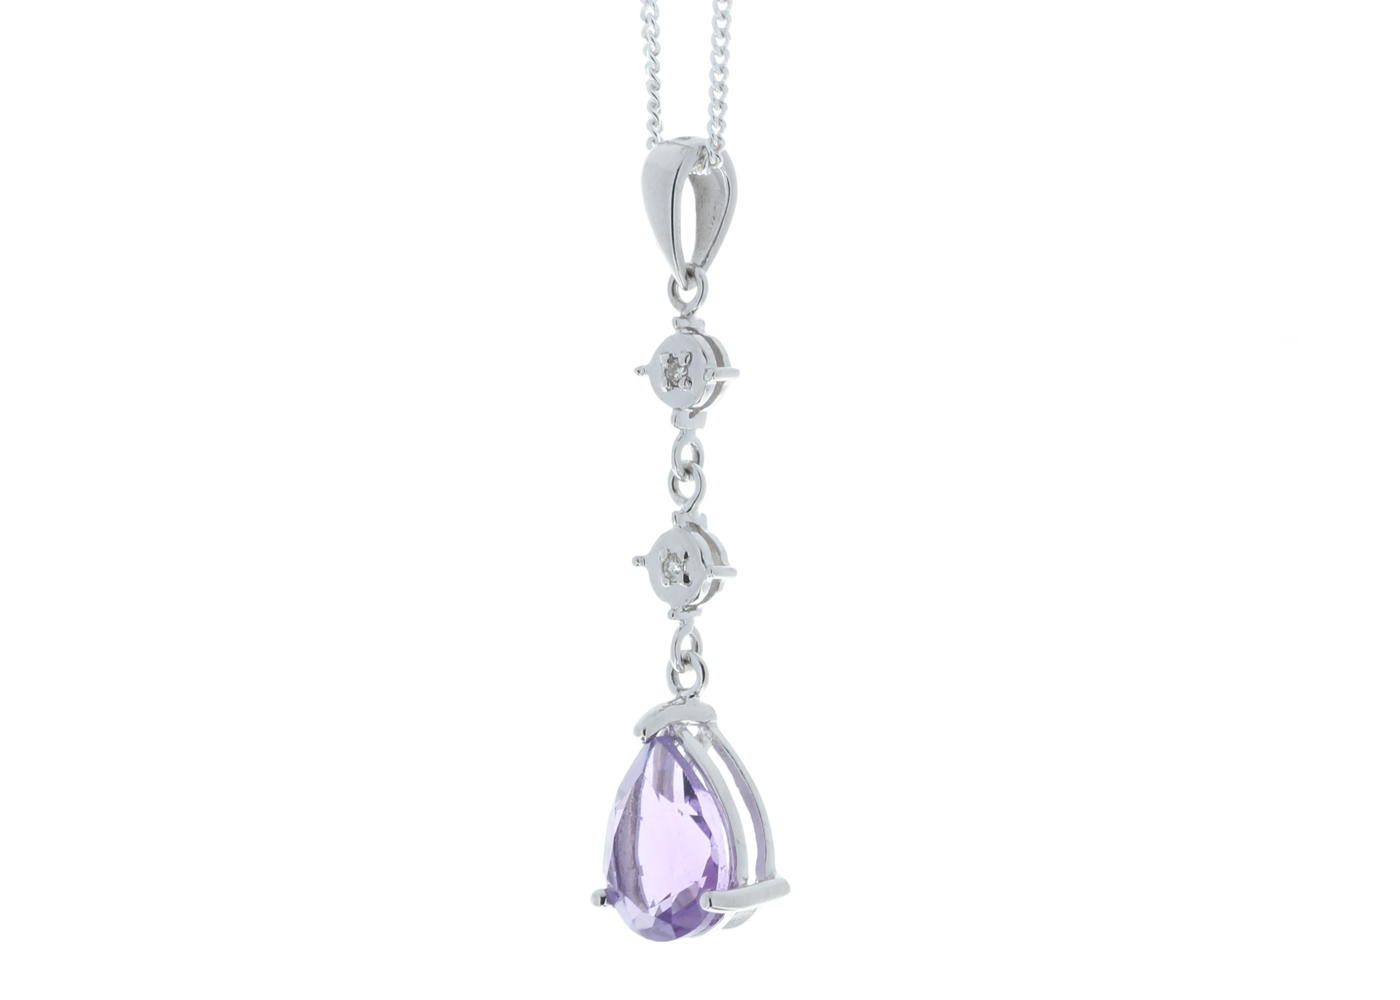 9ct White Gold Amethyst And Diamond Pendant - Image 4 of 5